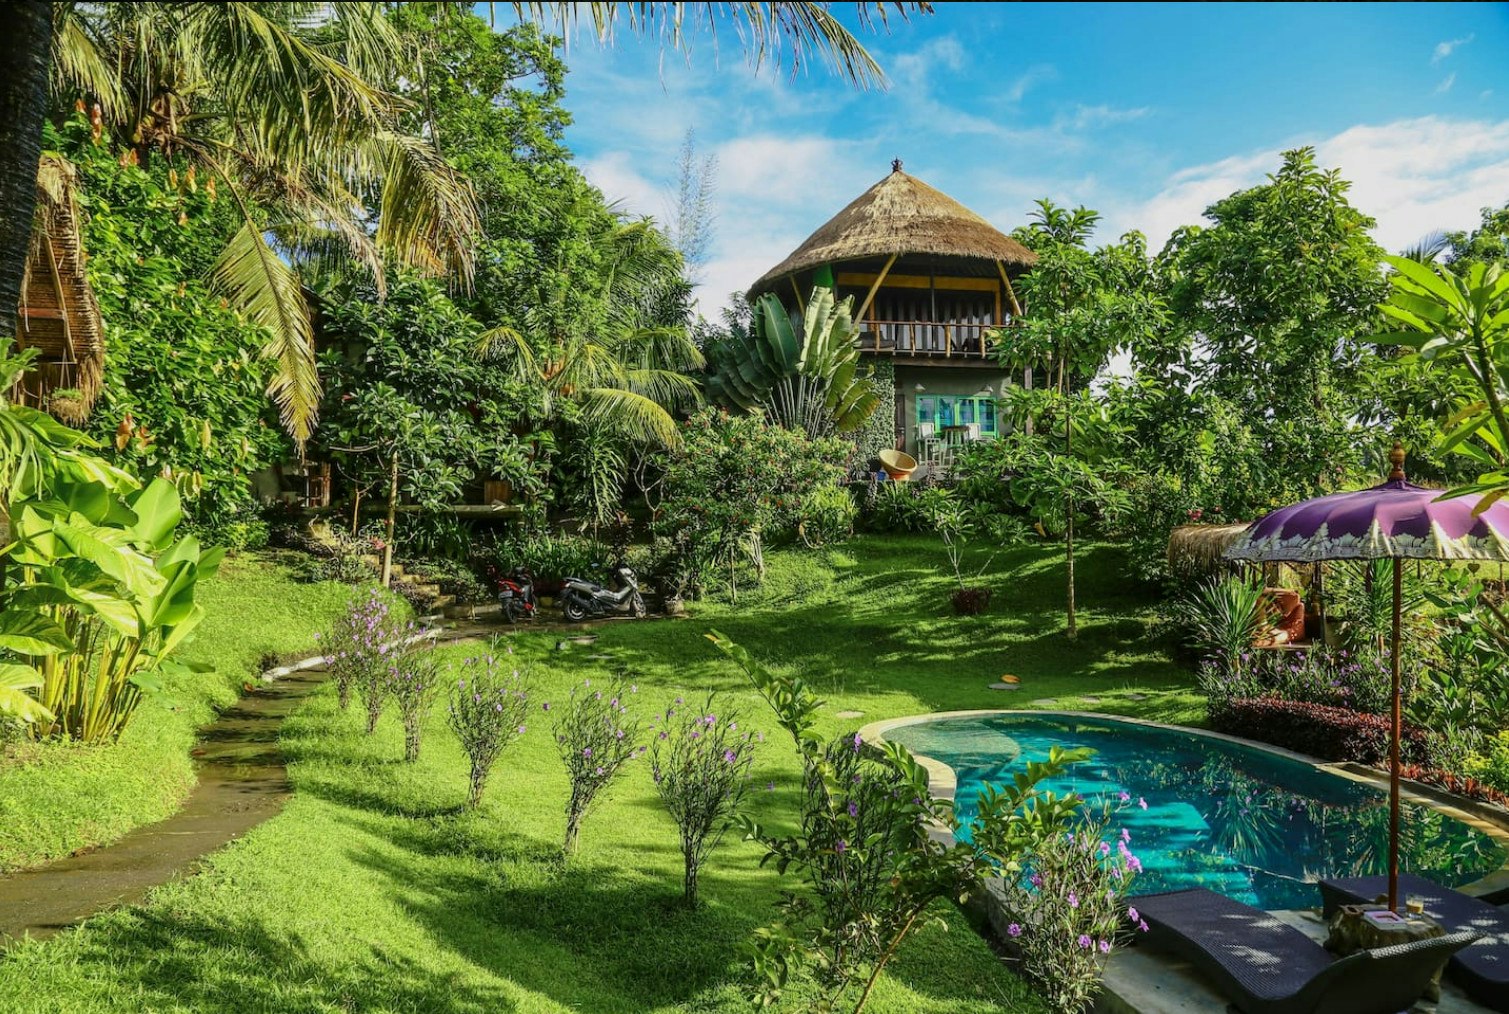 A picture of the treehouse in Bali among the jungle